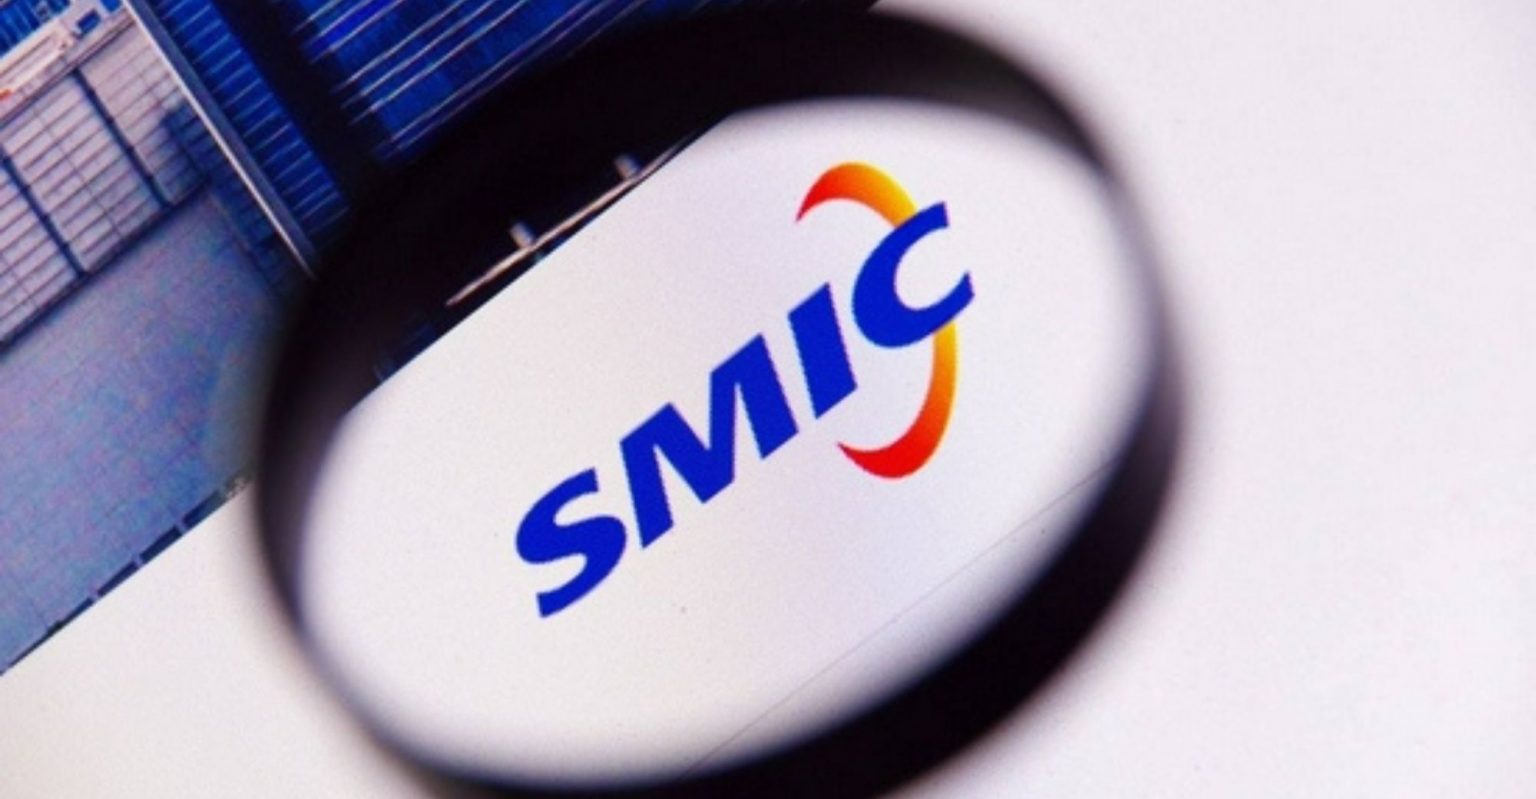 China’s SMIC reports record $5.4B revenue in 2021, up 39% YoY, and $1.7B profit, up 138% YoY, as it looks to add more chip production capacity amid US sanctions (Arjun Kharpal/CNBC)